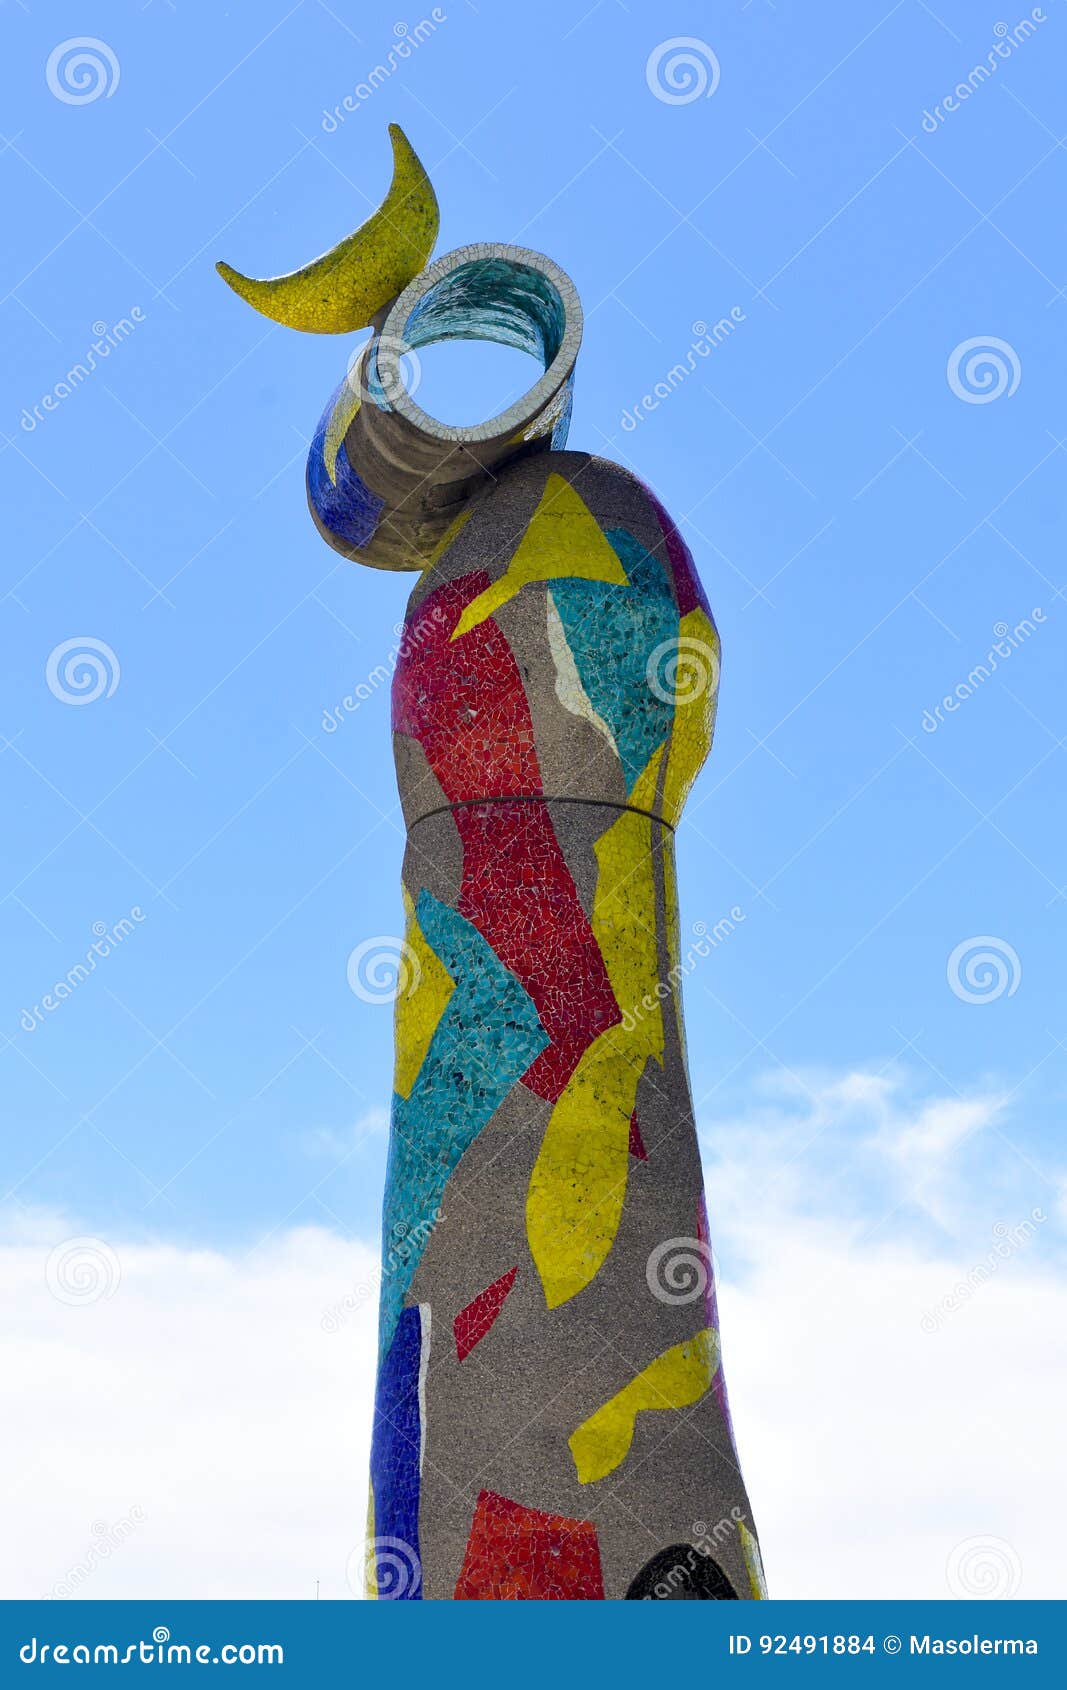 sculpture dona i ocell, woman and bird, ed by artist joan miro.